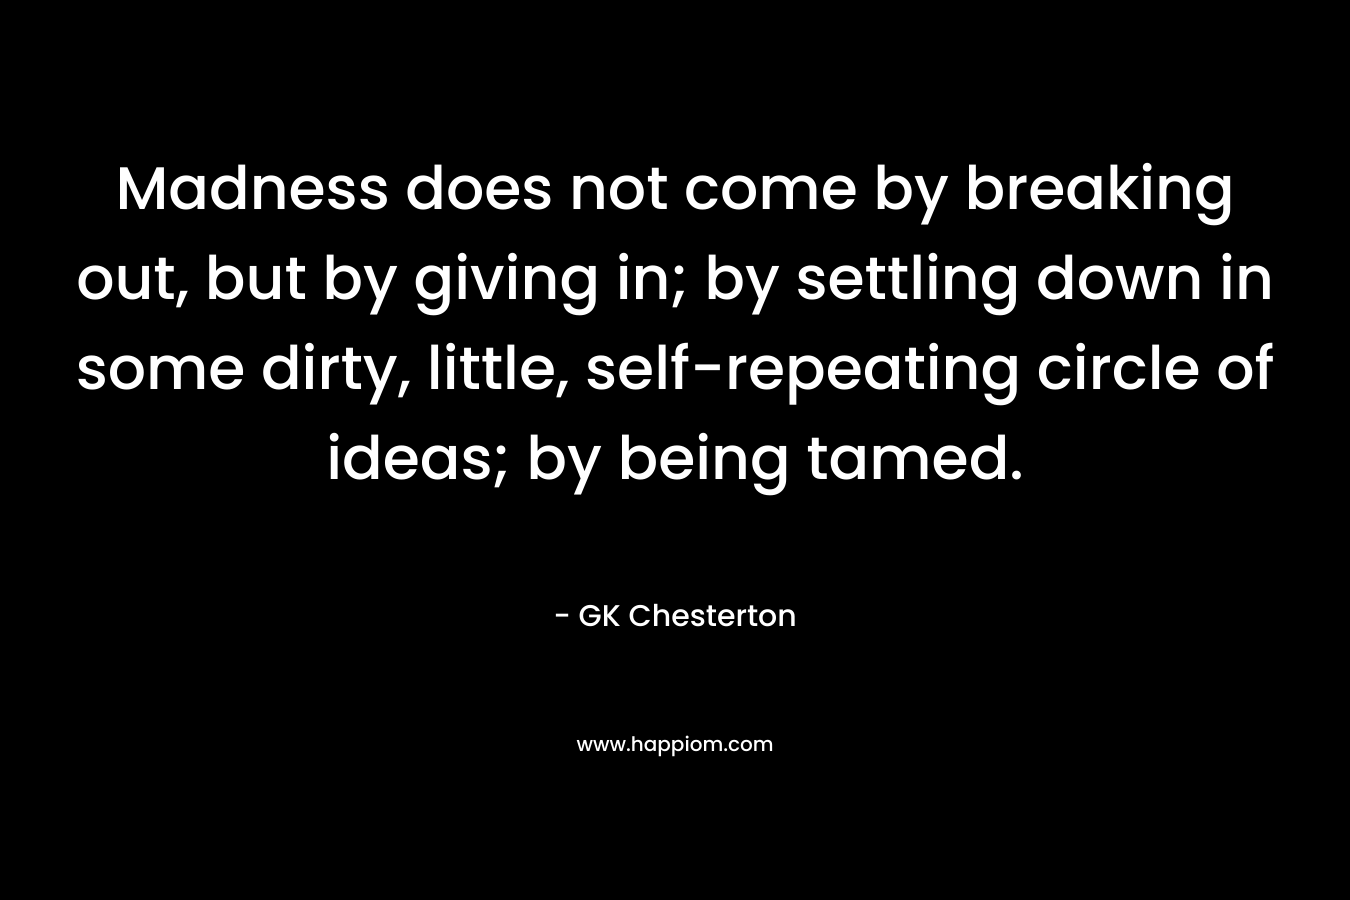 Madness does not come by breaking out, but by giving in; by settling down in some dirty, little, self-repeating circle of ideas; by being tamed. – GK Chesterton